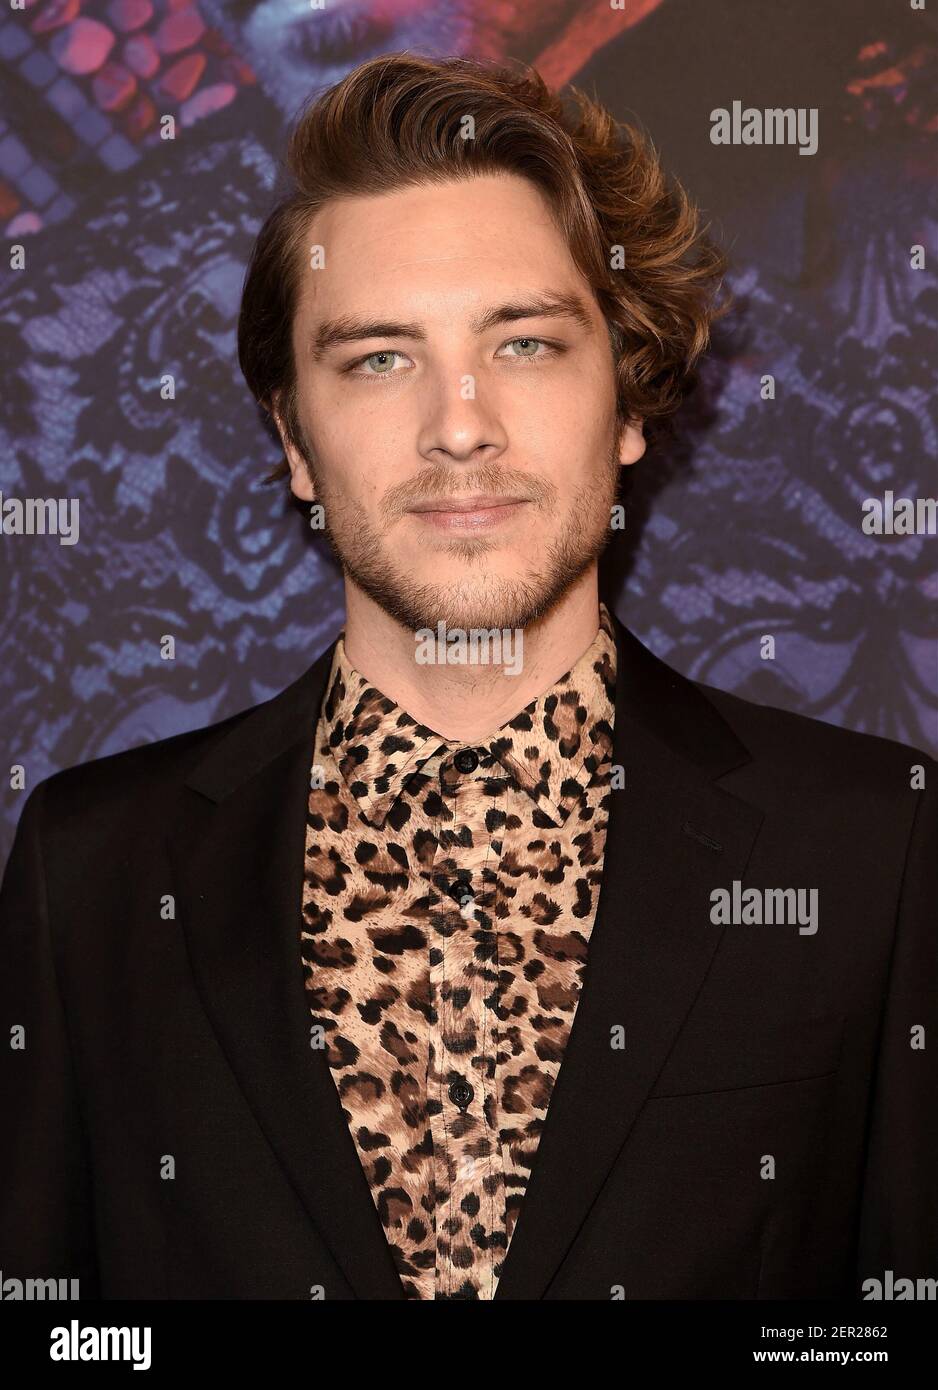 LOS ANGELES, CA - MARCH 19: Cody Fern attends the FYC Red Carpet Event for  FX's "The Assassination of Gianni Versace: American Crime Story" at the DGA  Theater on March 19, 2018